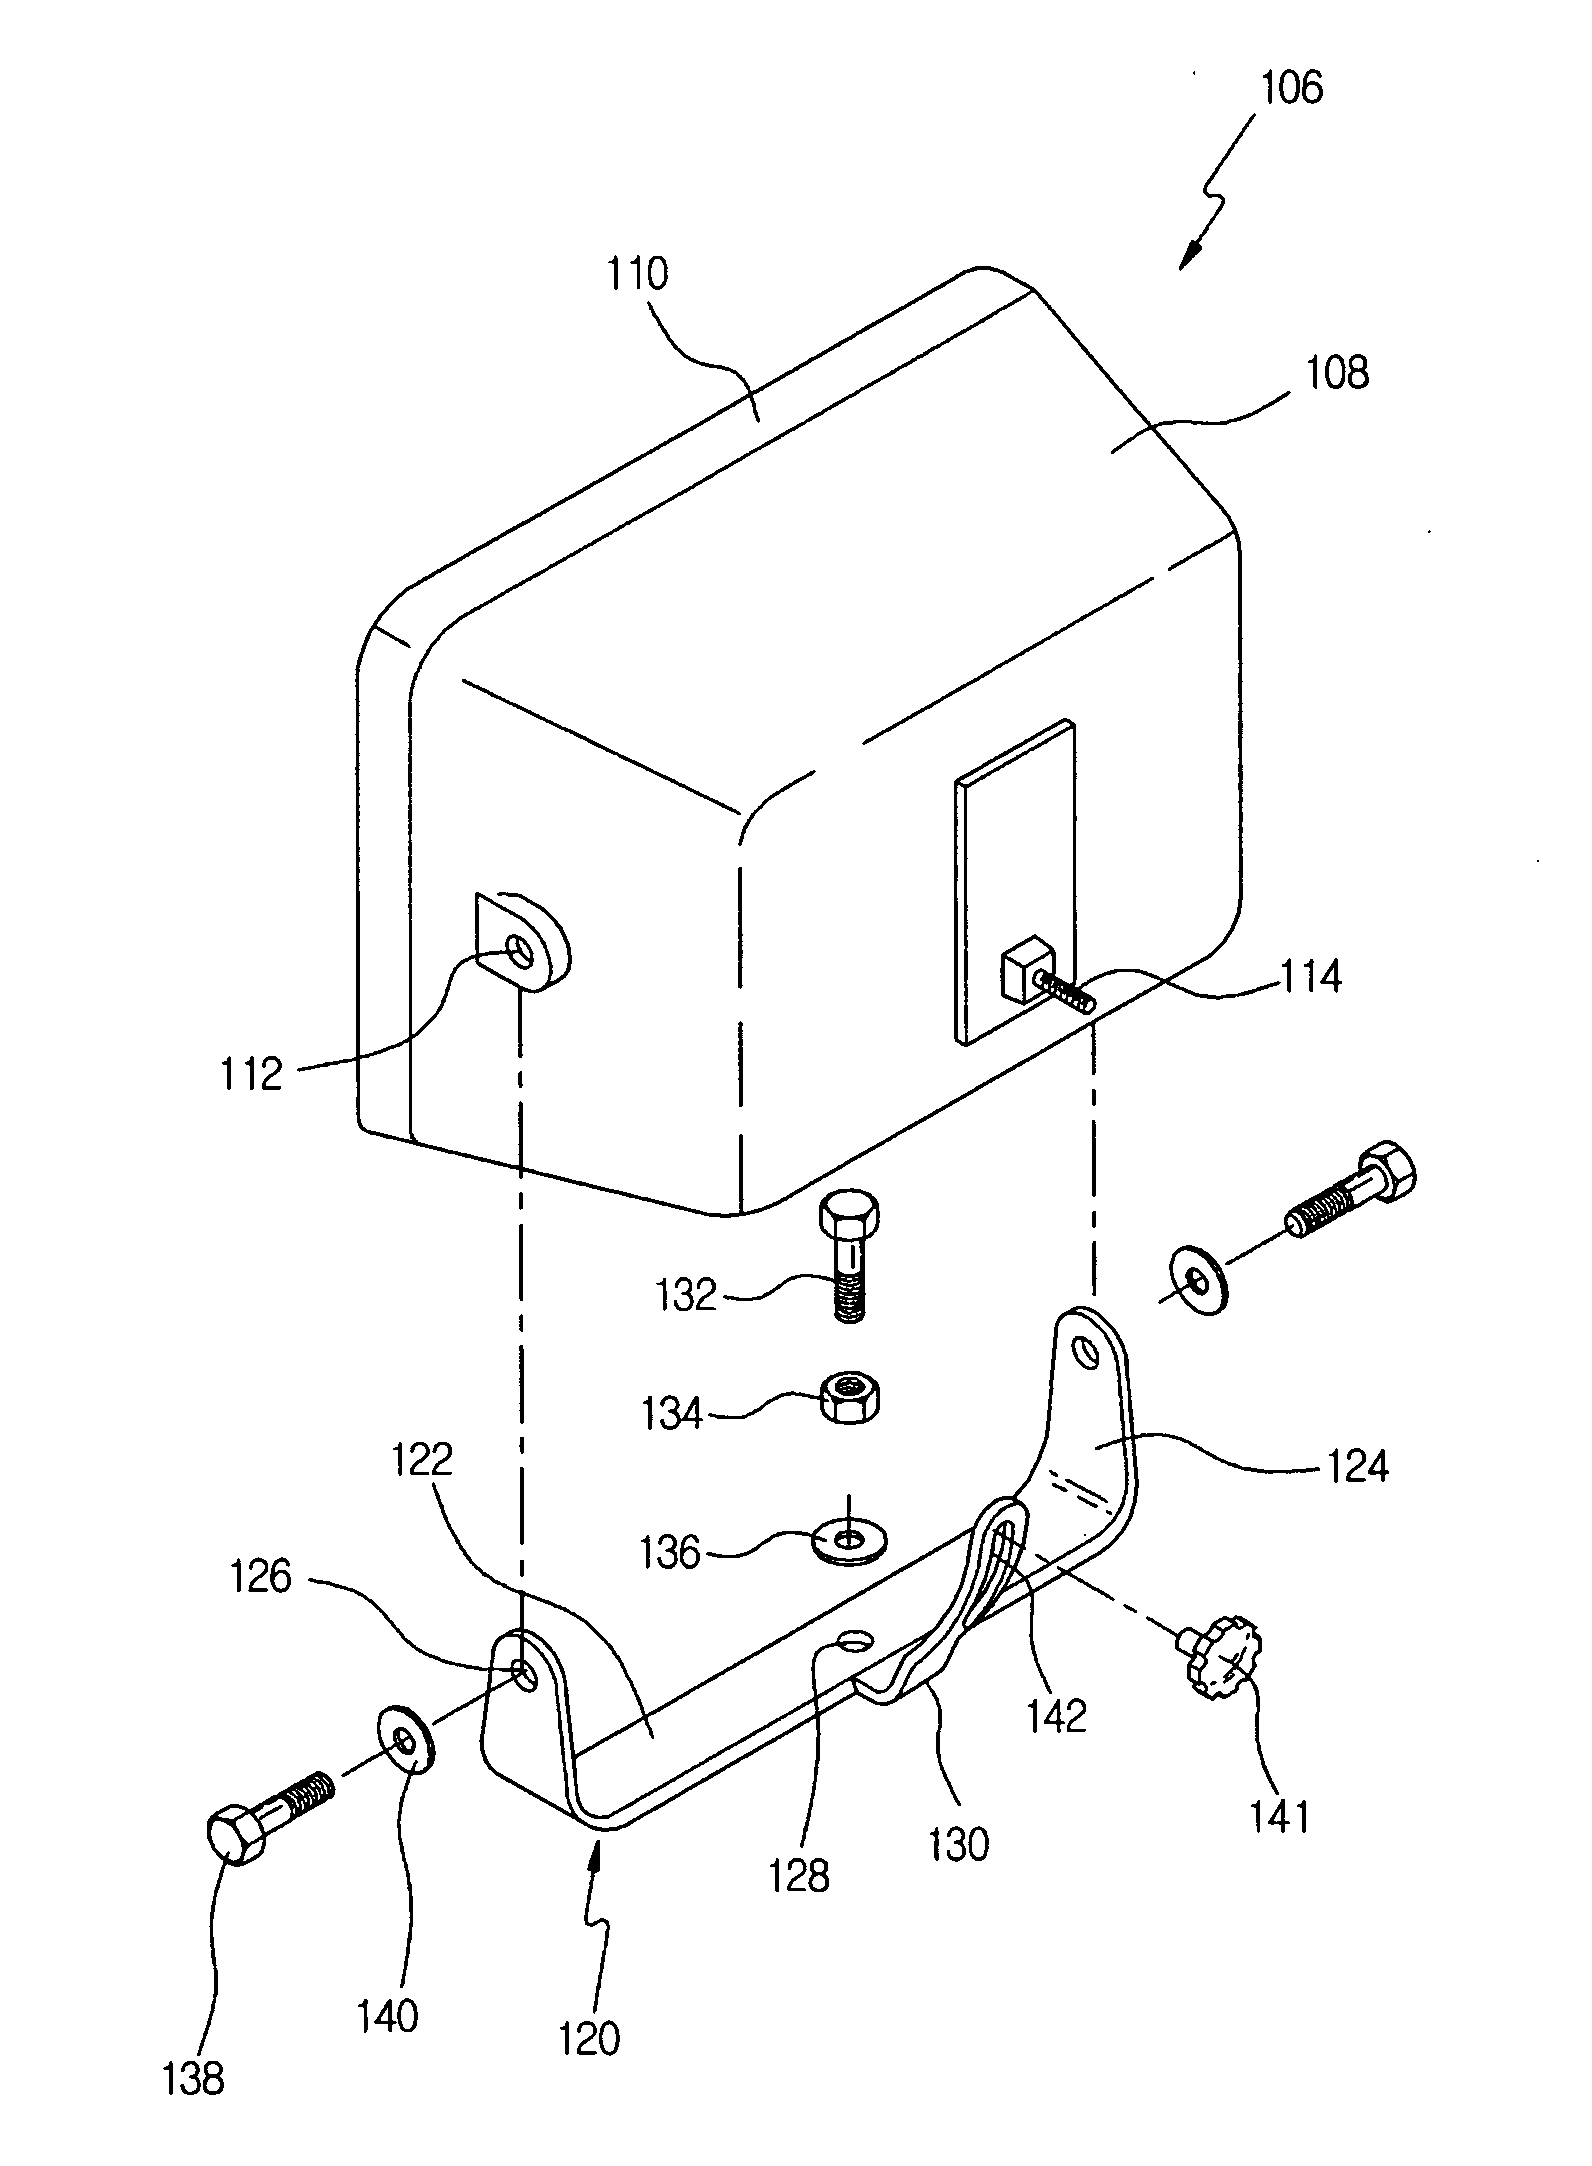 Structure of overhead lamp and mounting bracket for constructional vehicle